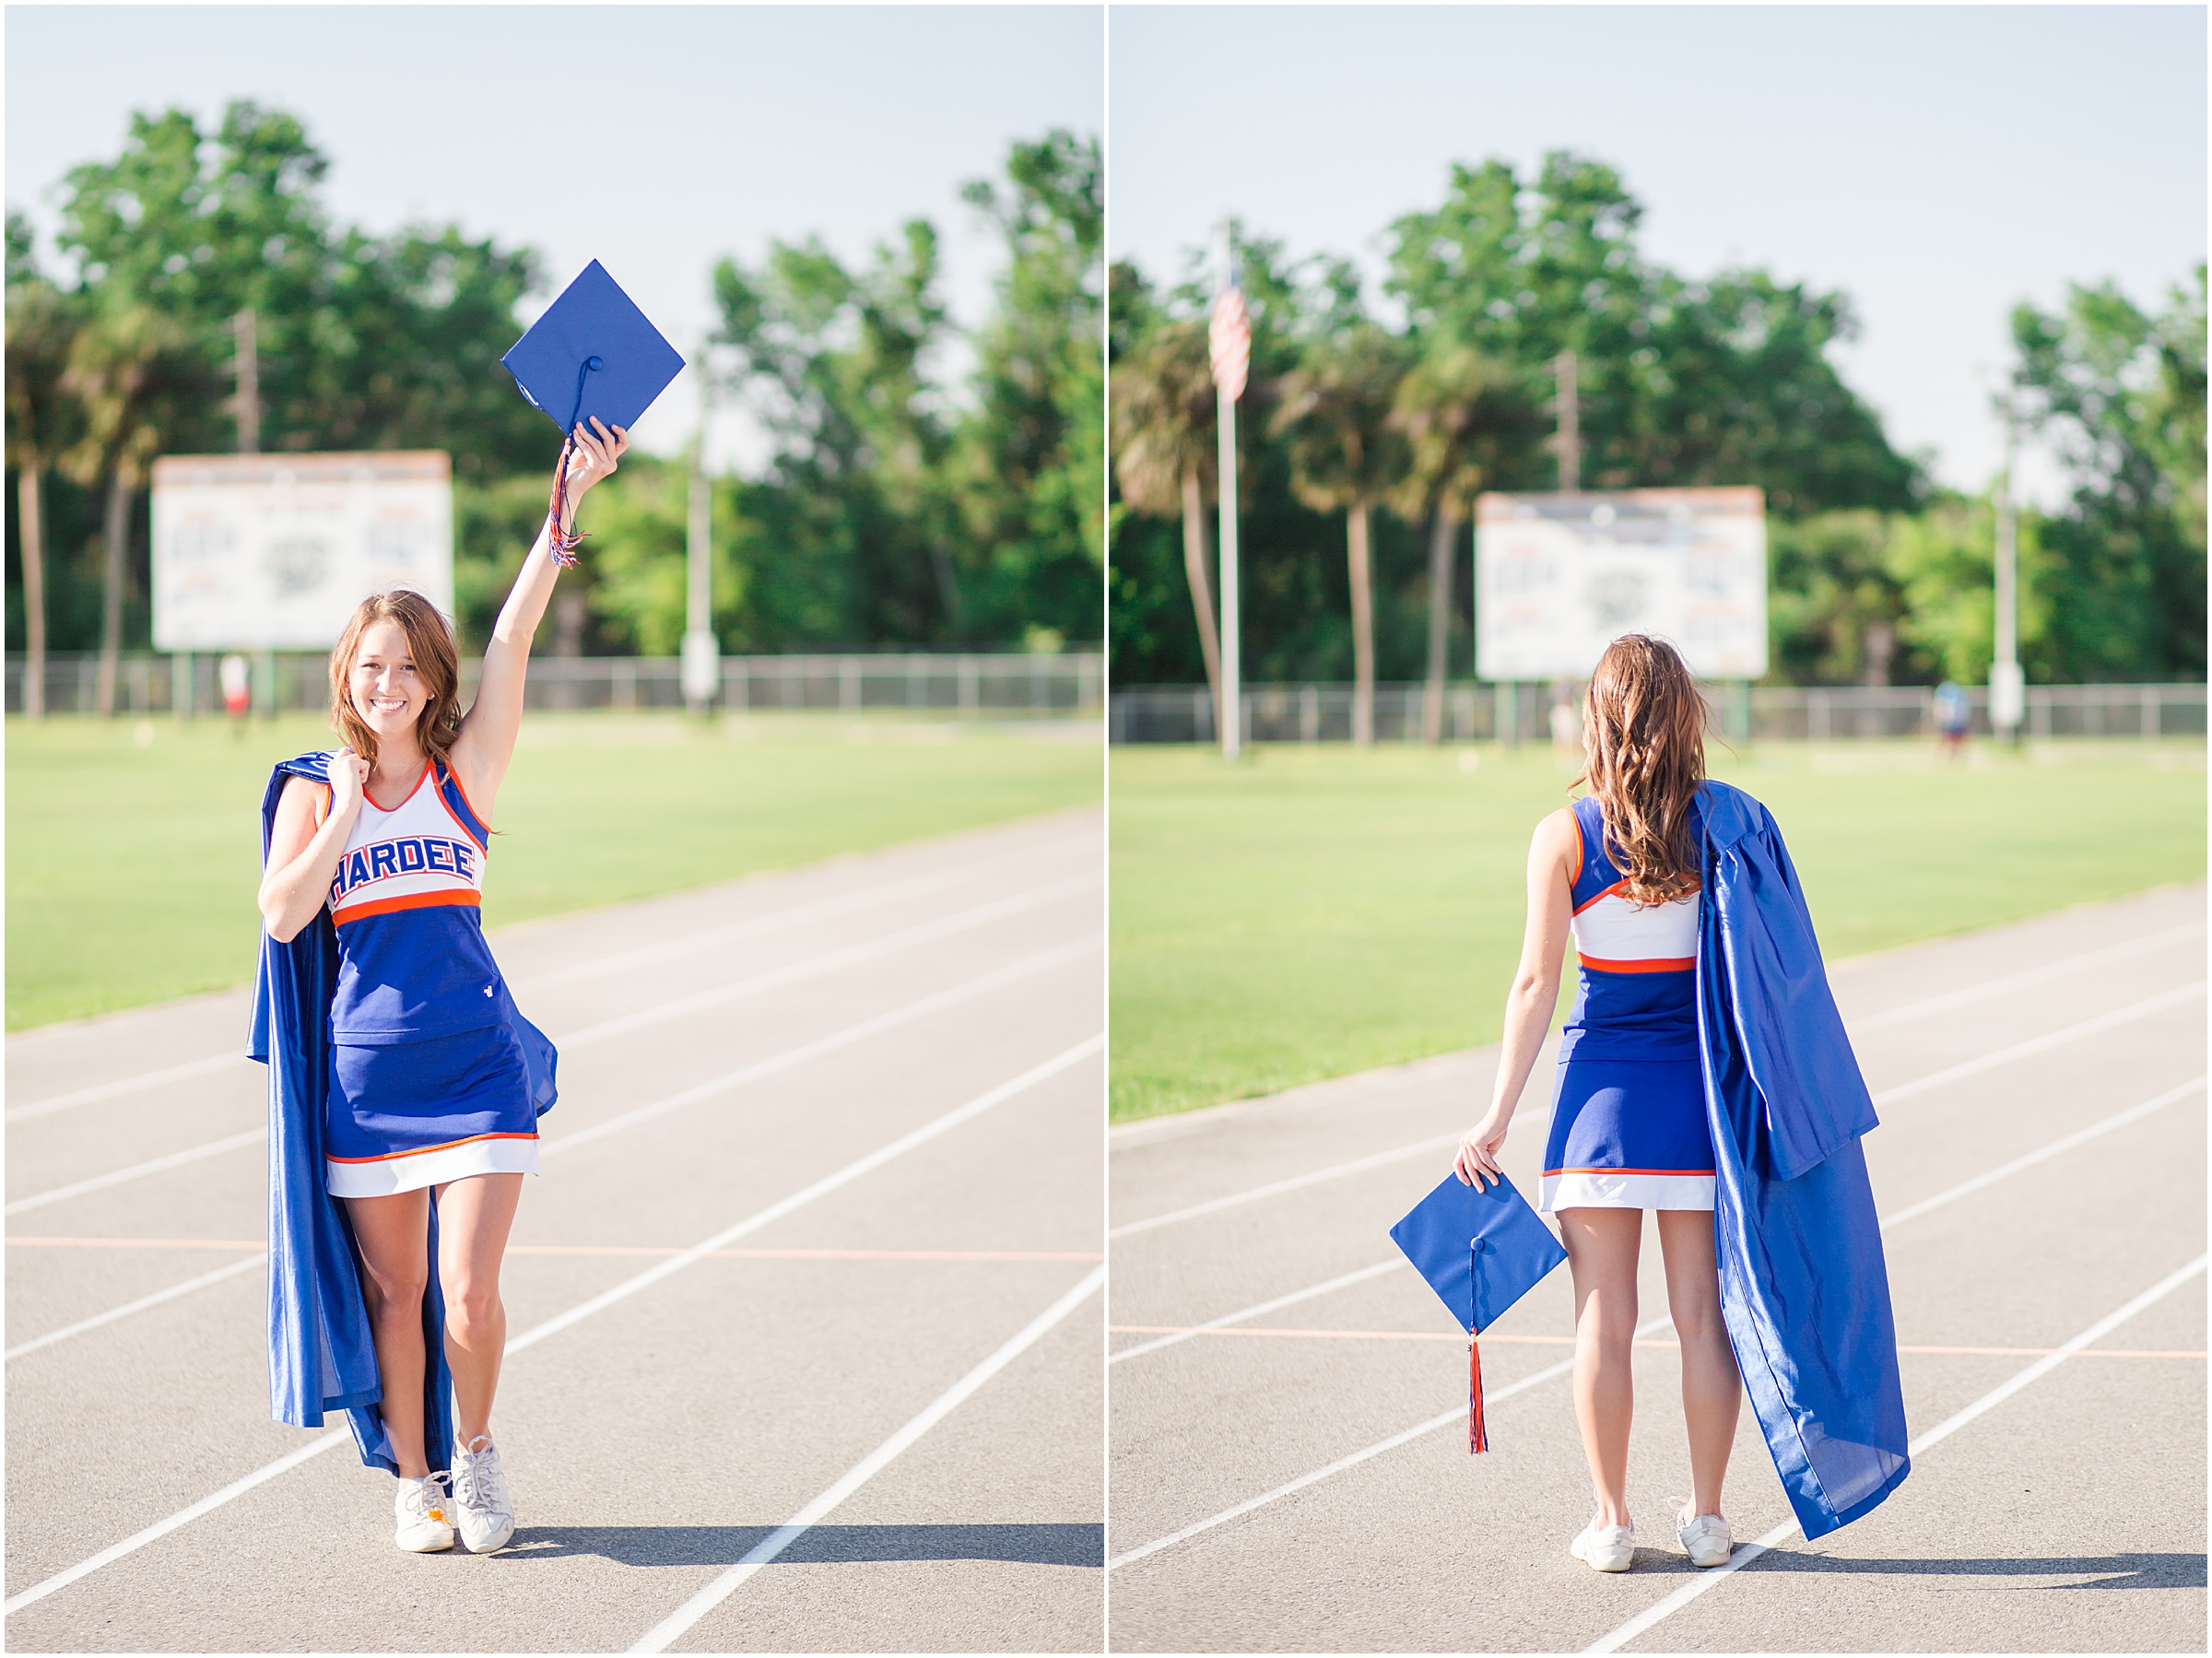 2019 Hardee High School Senior, Claire, wore her cheerleading uniform and cap & gown for her Wauchula FL photo shoot.